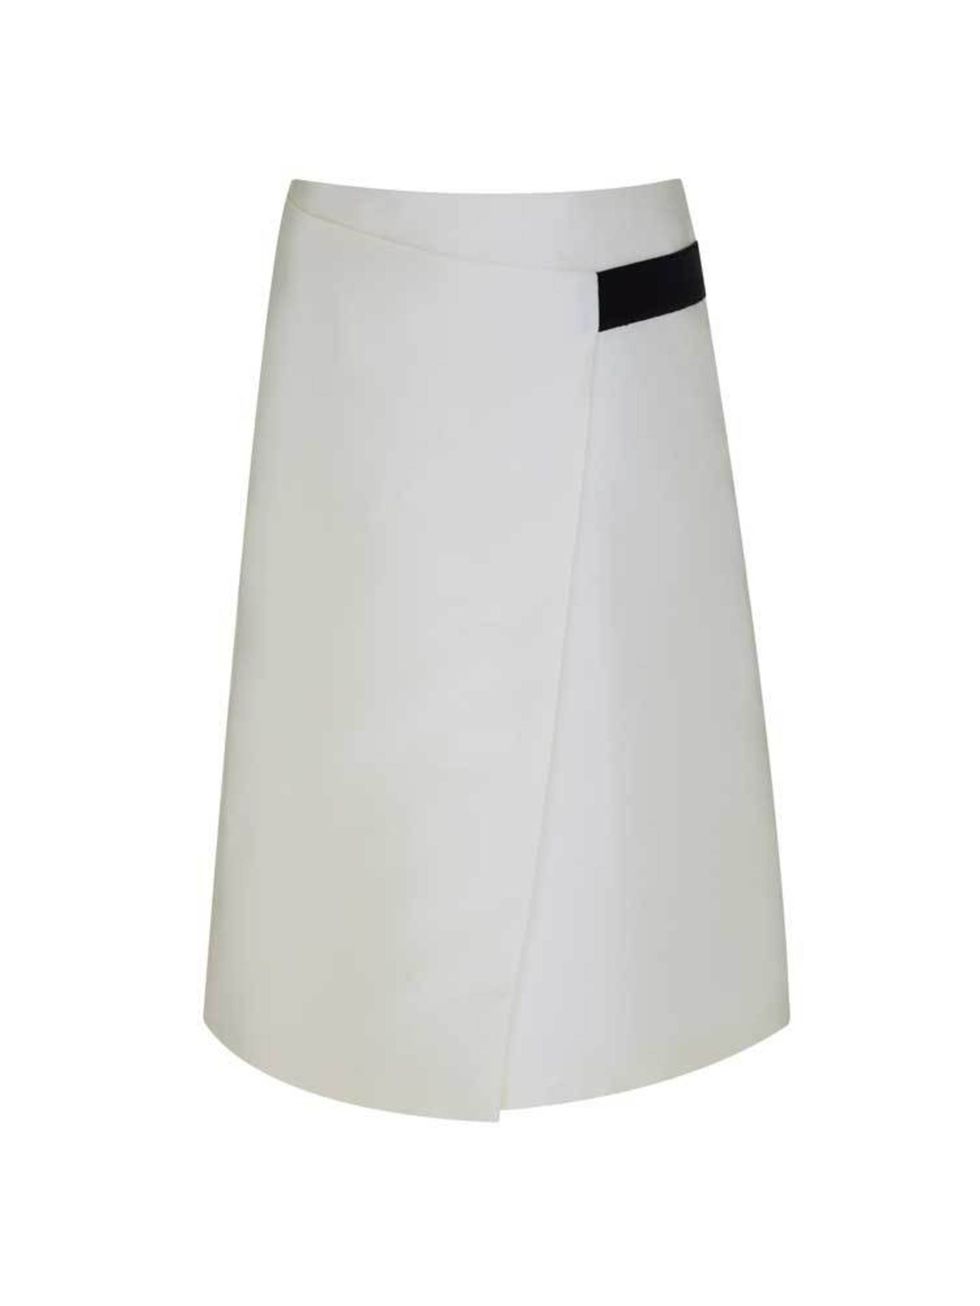 <p>Rosslyn skirt, £45, from <a href="https://www.finerylondon.com/" target="_blank">Finerylondon.com</a></p>

<p><a href="http://www.hearstmagazines.co.uk/elle/VES10554">Read all about Finery in the March issue of ELLE, out now.</a></p>